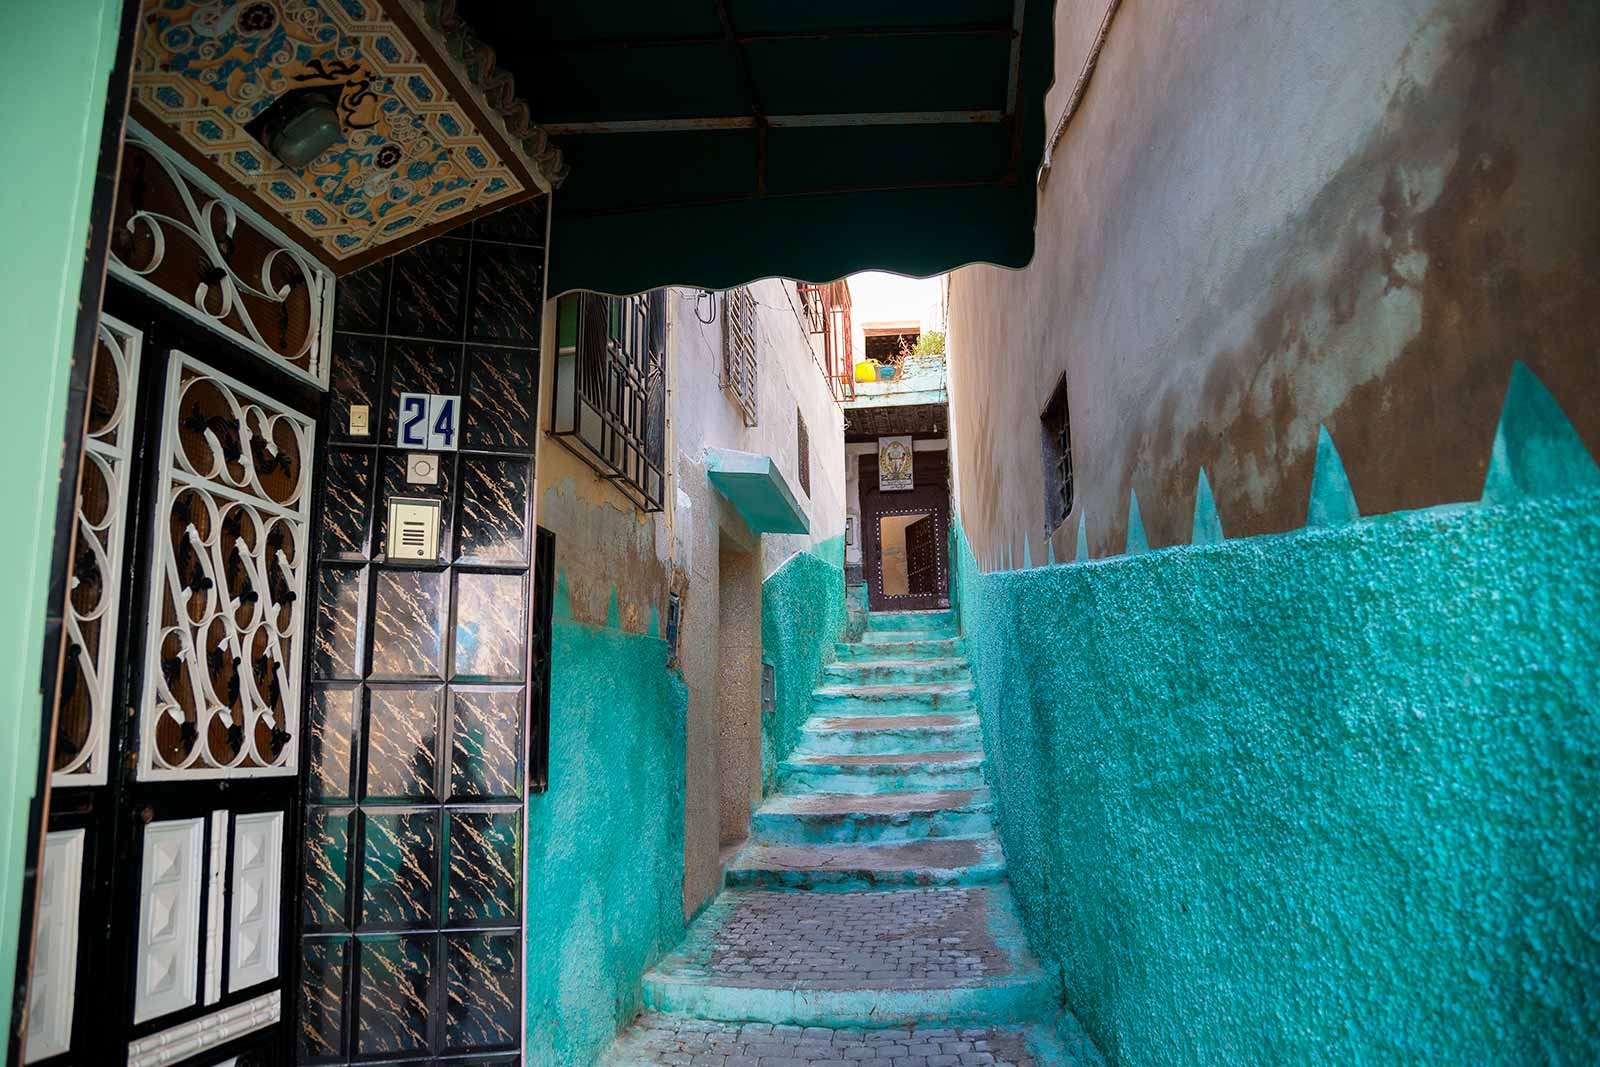 The sheer endless streets of Moulay Idriss reminded us of colourful Chefchaouen, but also a little bit of the Medina of Marrakech.